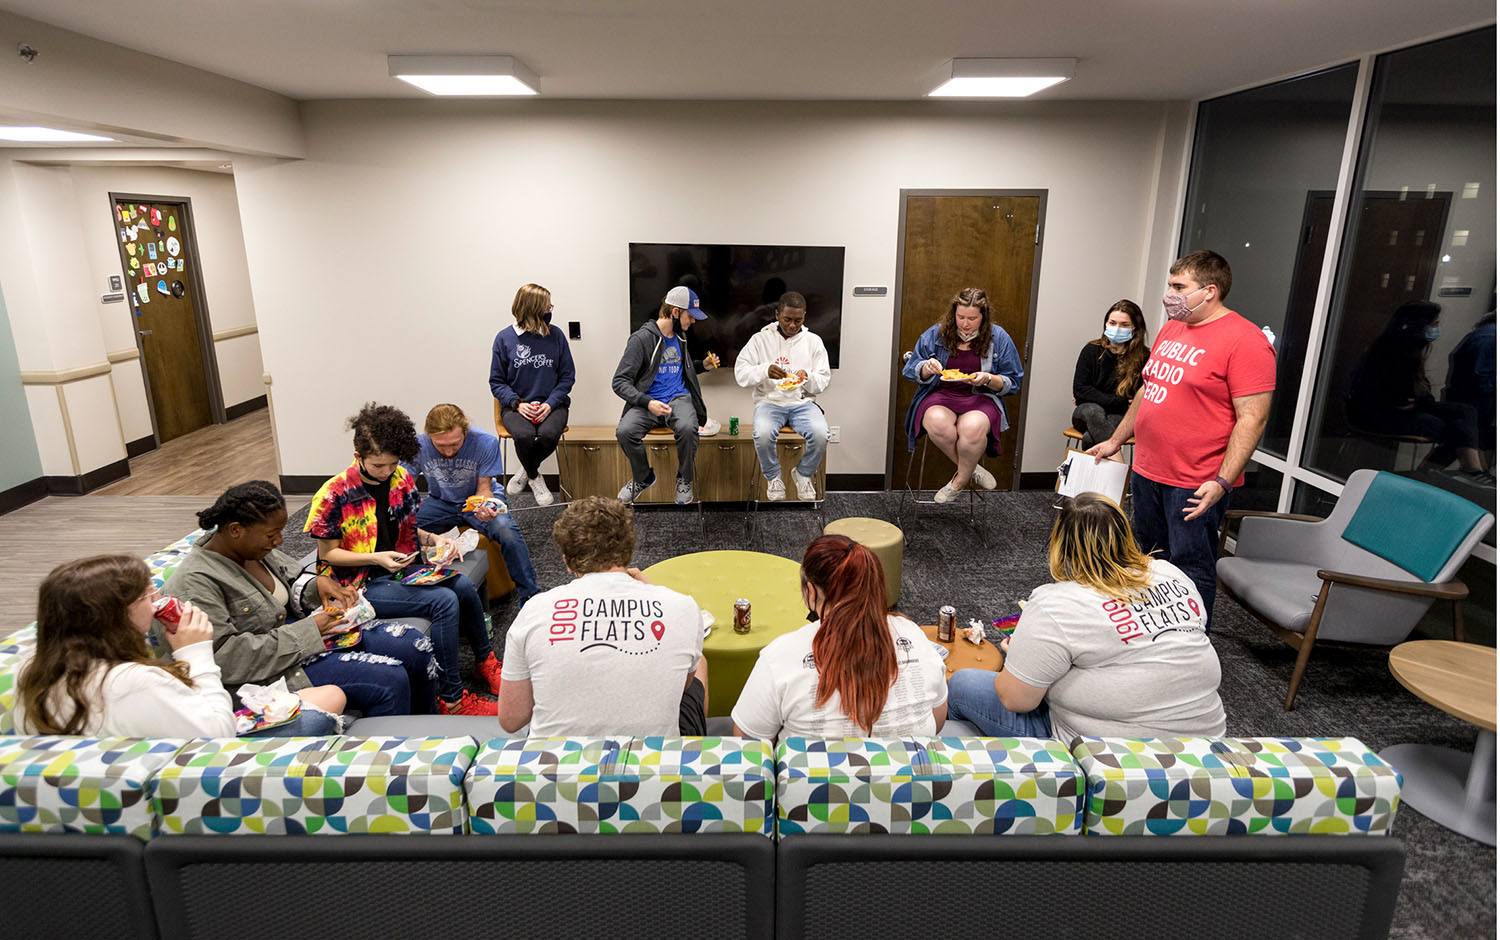 During the Let’s Taco Bout College event, a panel of upperclassmen in the School of Media shared their advice and experiences to help LLC students navigate their freshman year.